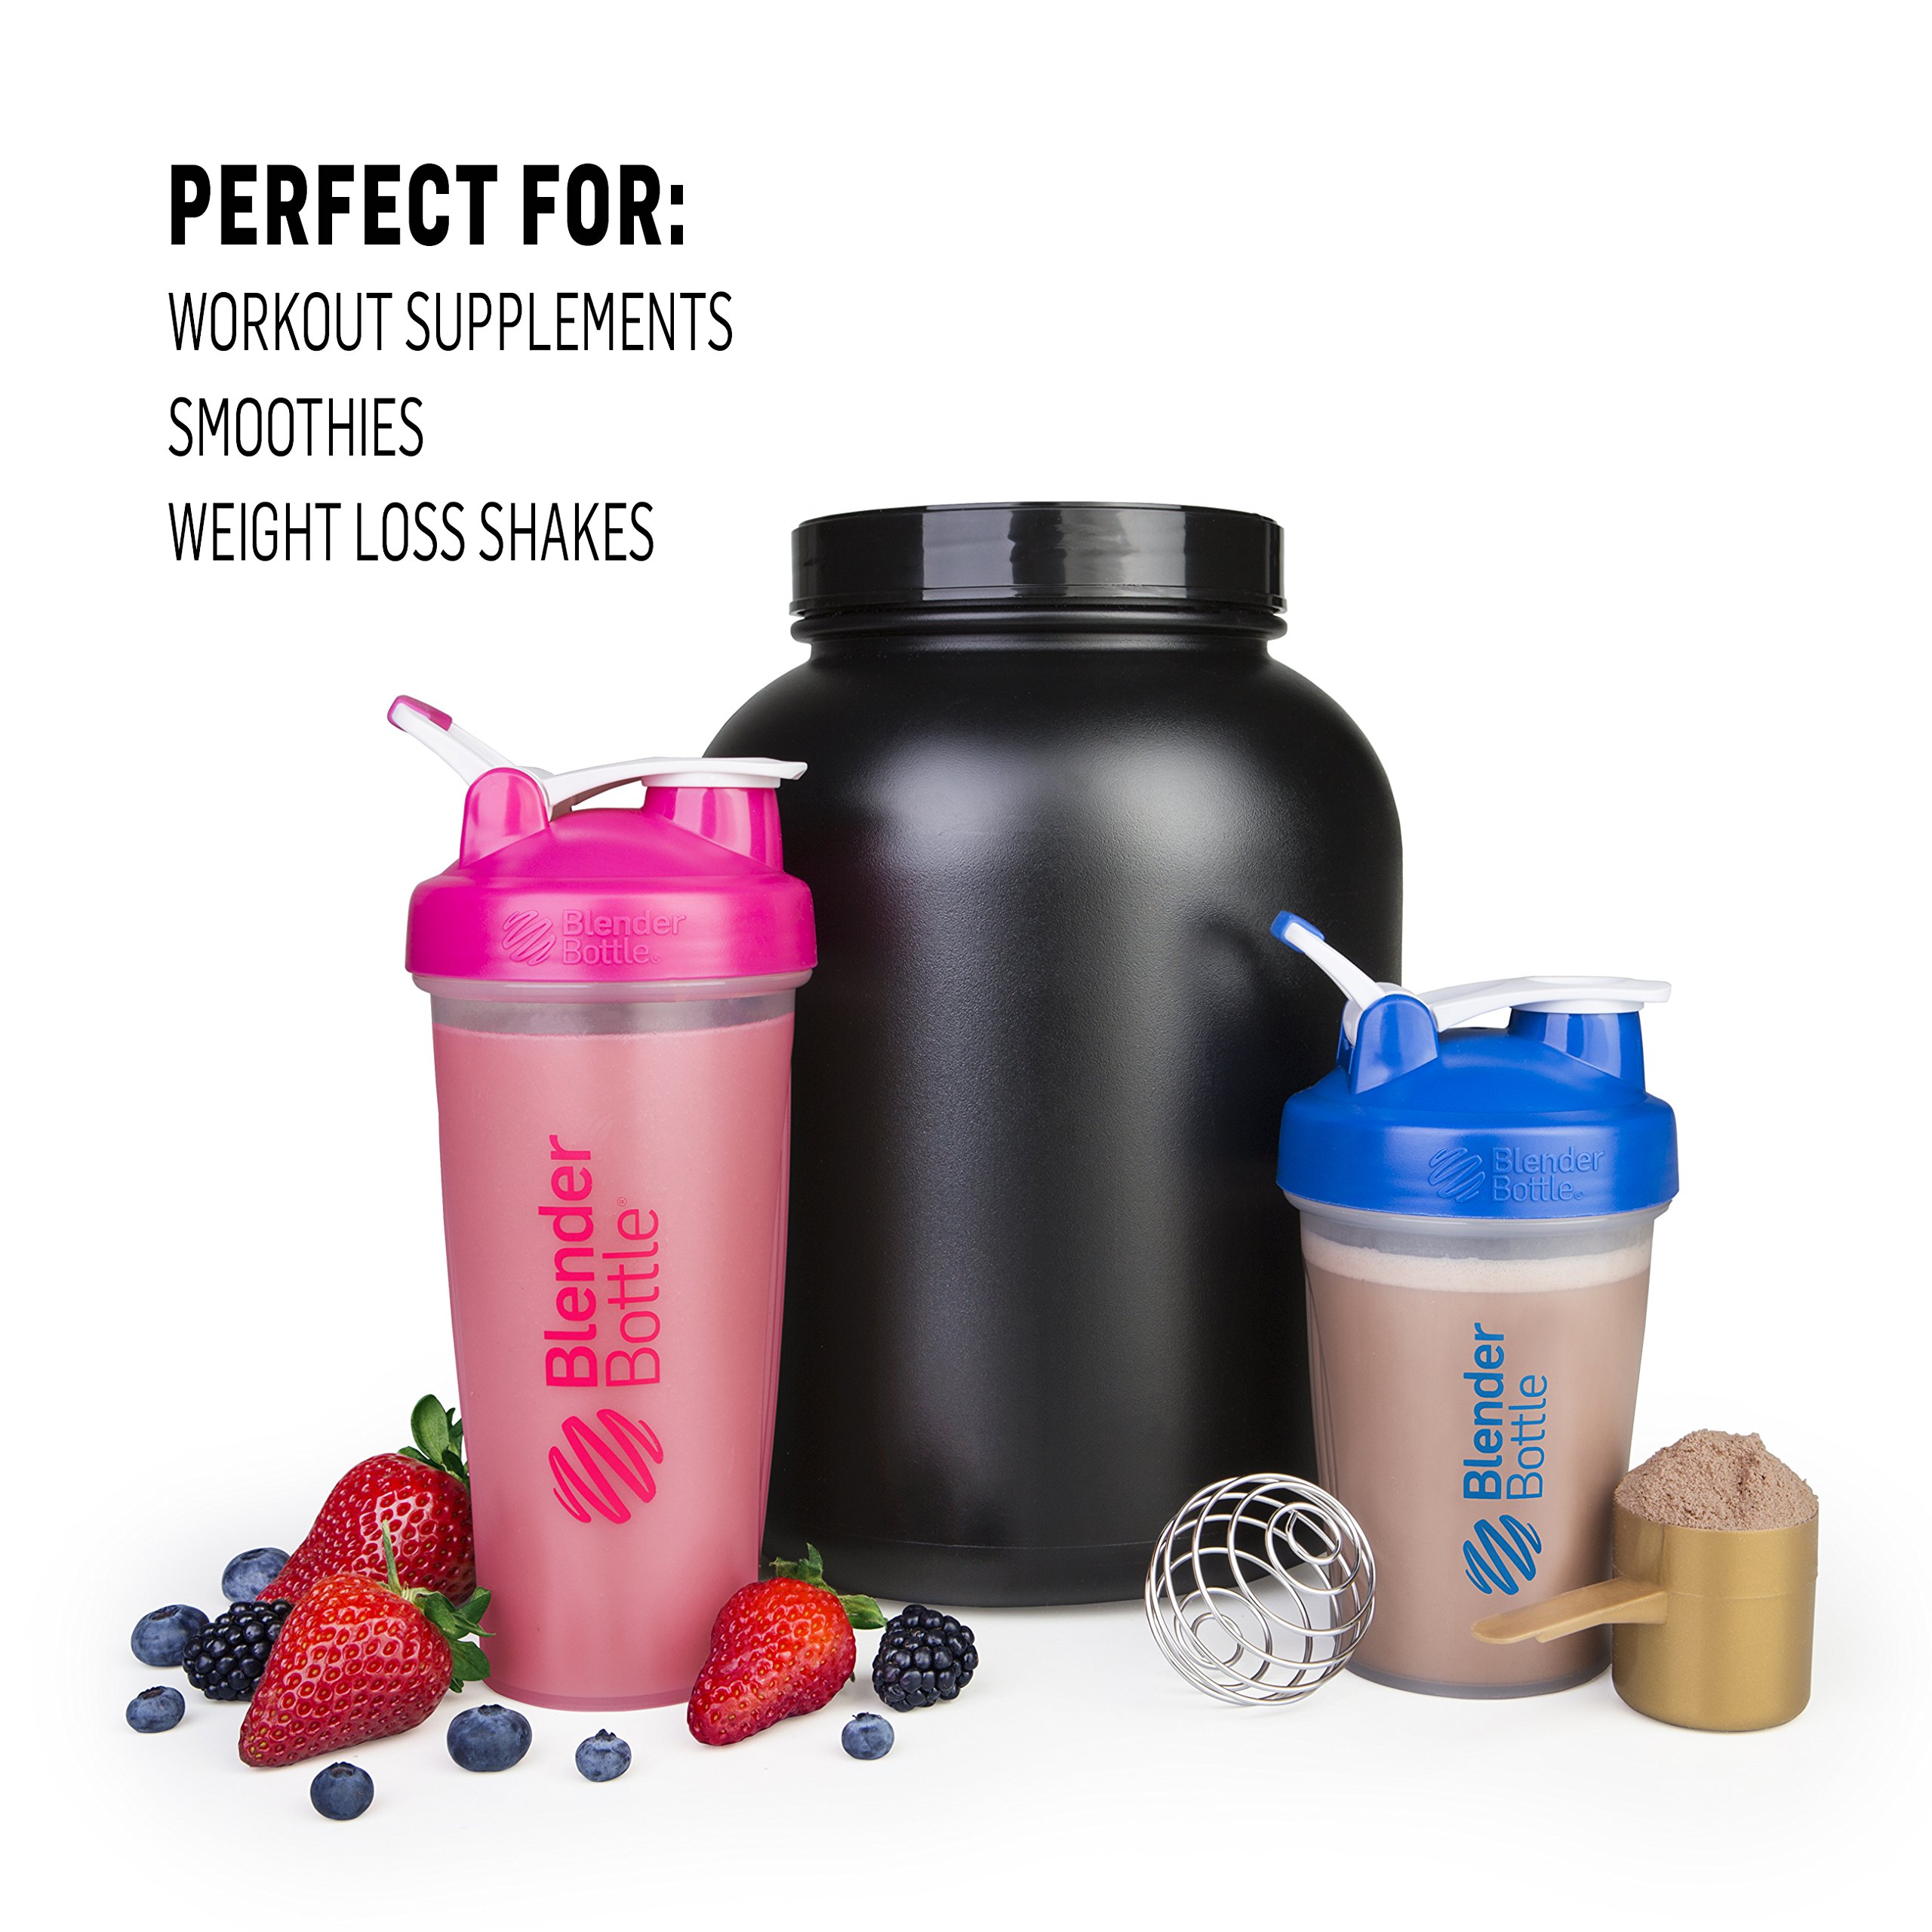 BlenderBottle Classic Shaker Bottle Perfect for Protein Shakes and Pre Workout, 28-Ounce (2 Pack), Plum/Plum and Teal/Teal